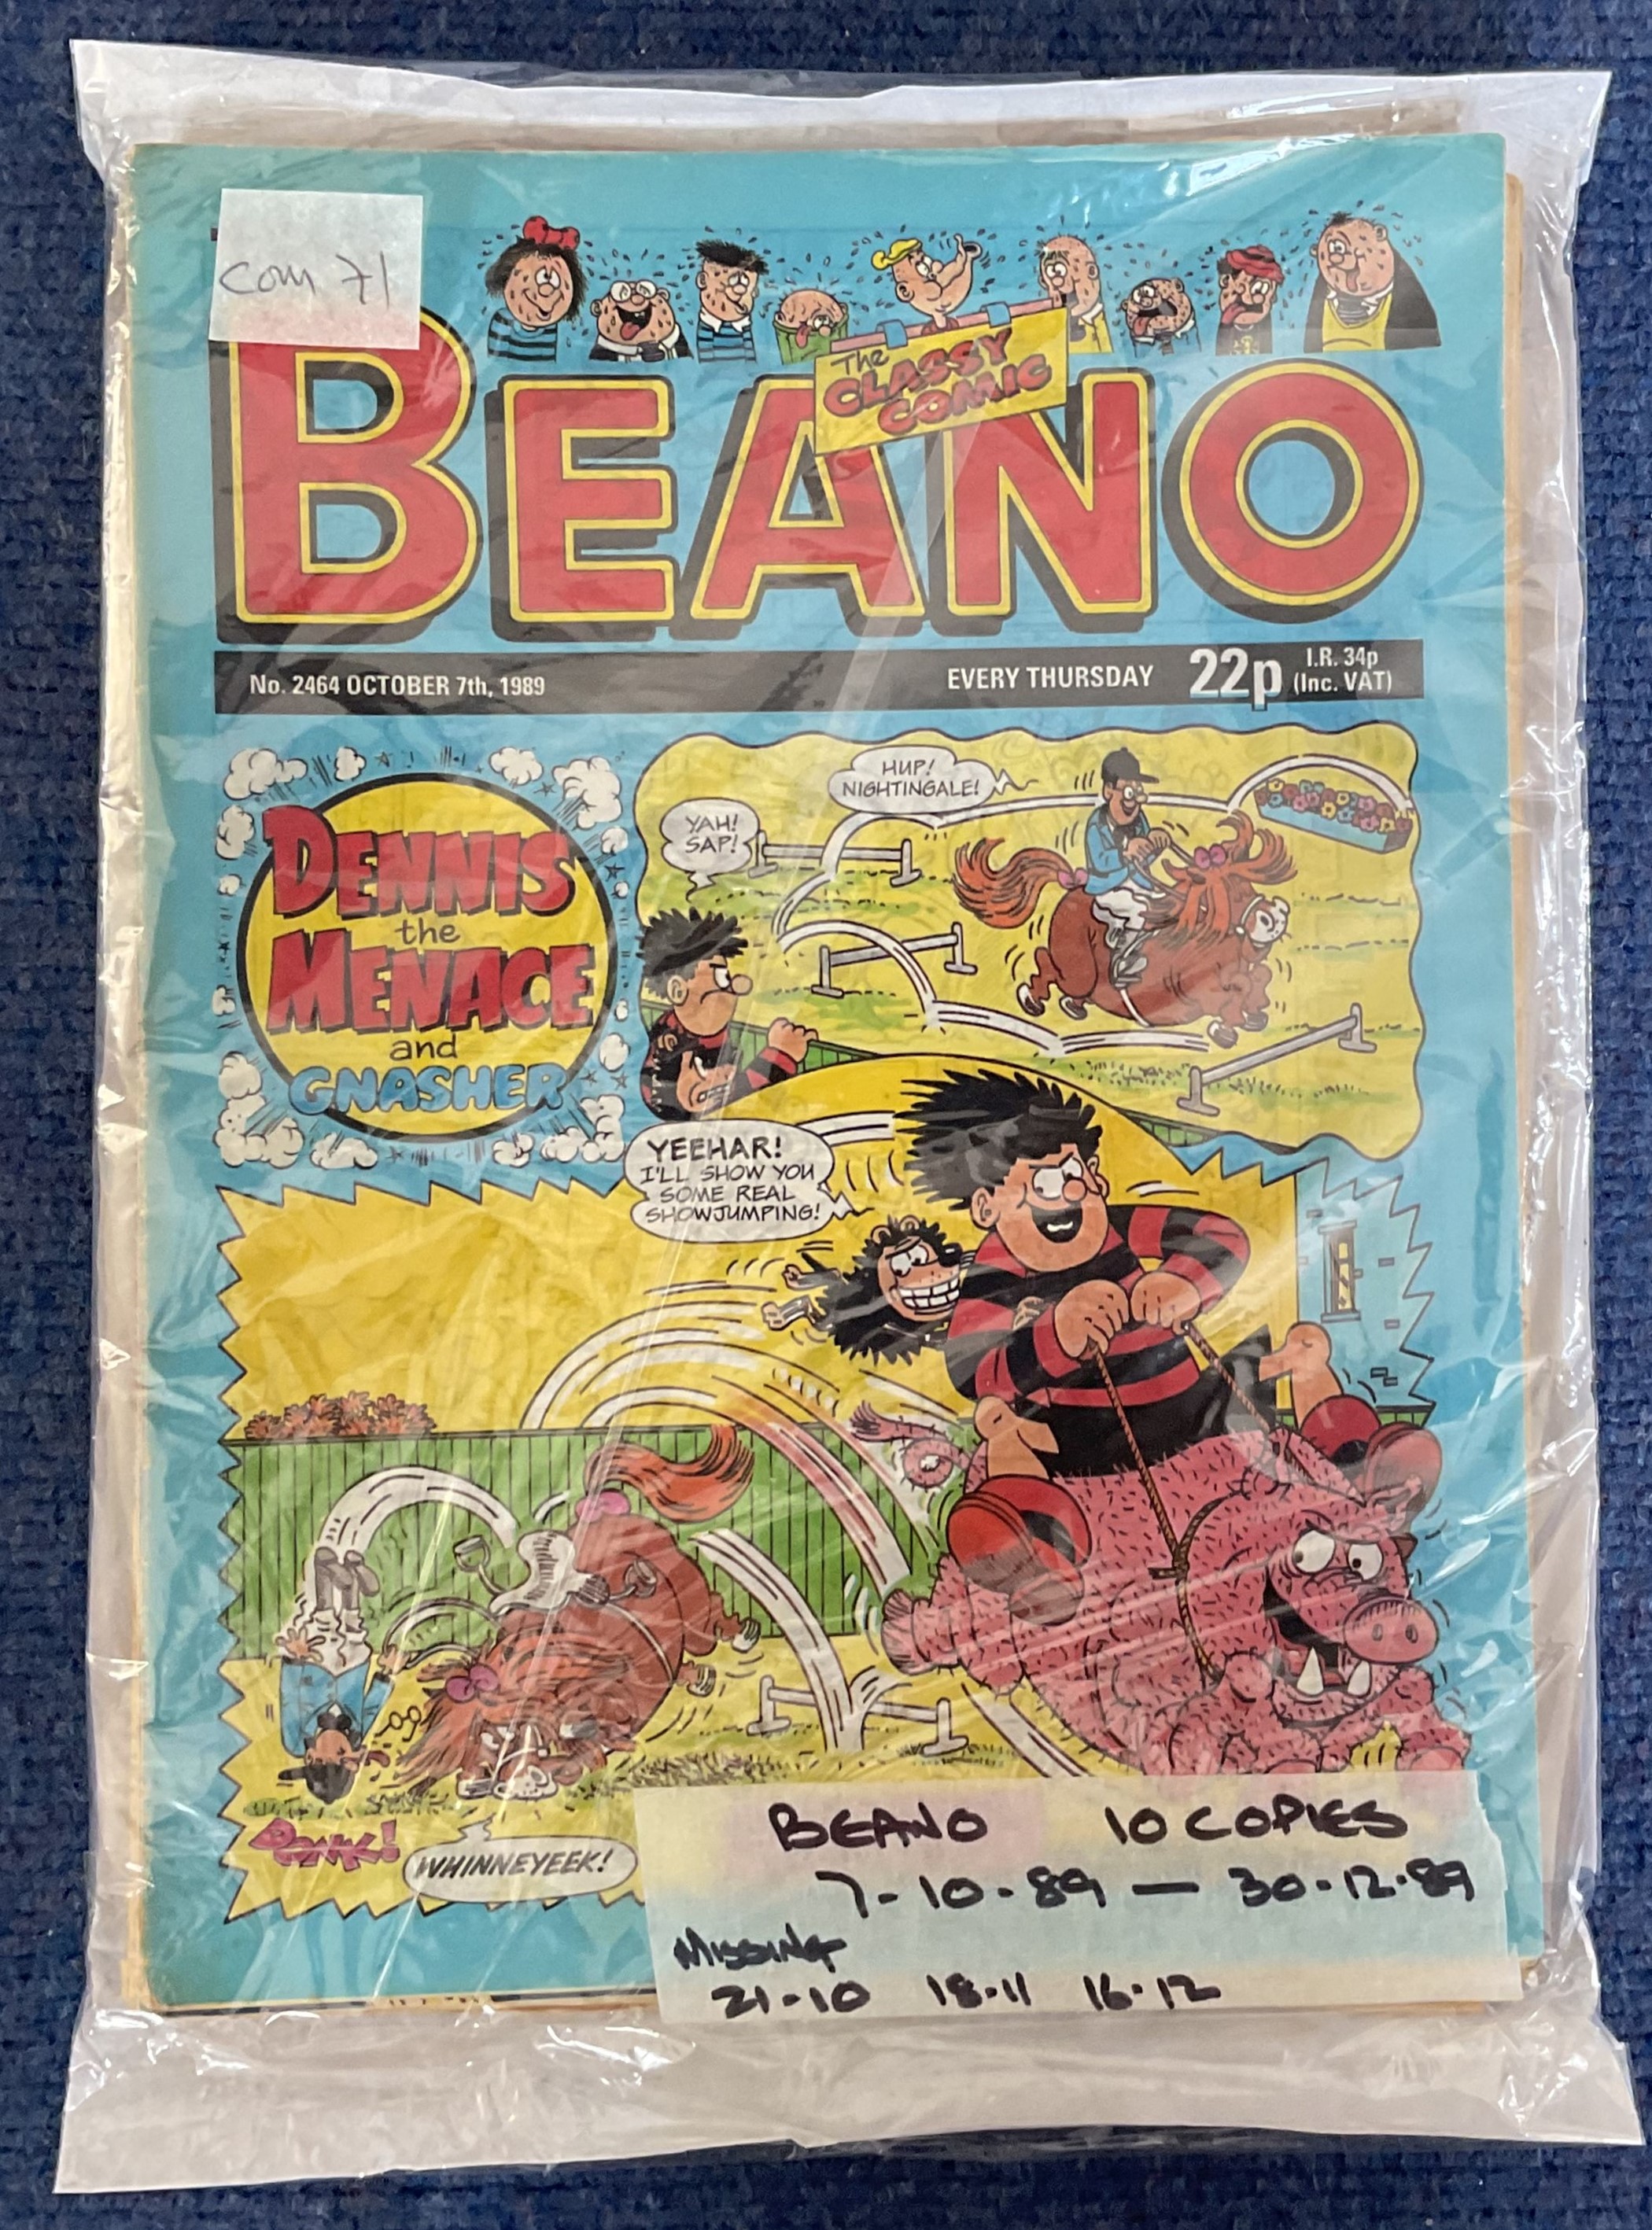 Beano collection 10 editions dating 7.10.89 to 30.12.89. Good condition. All autographs come with